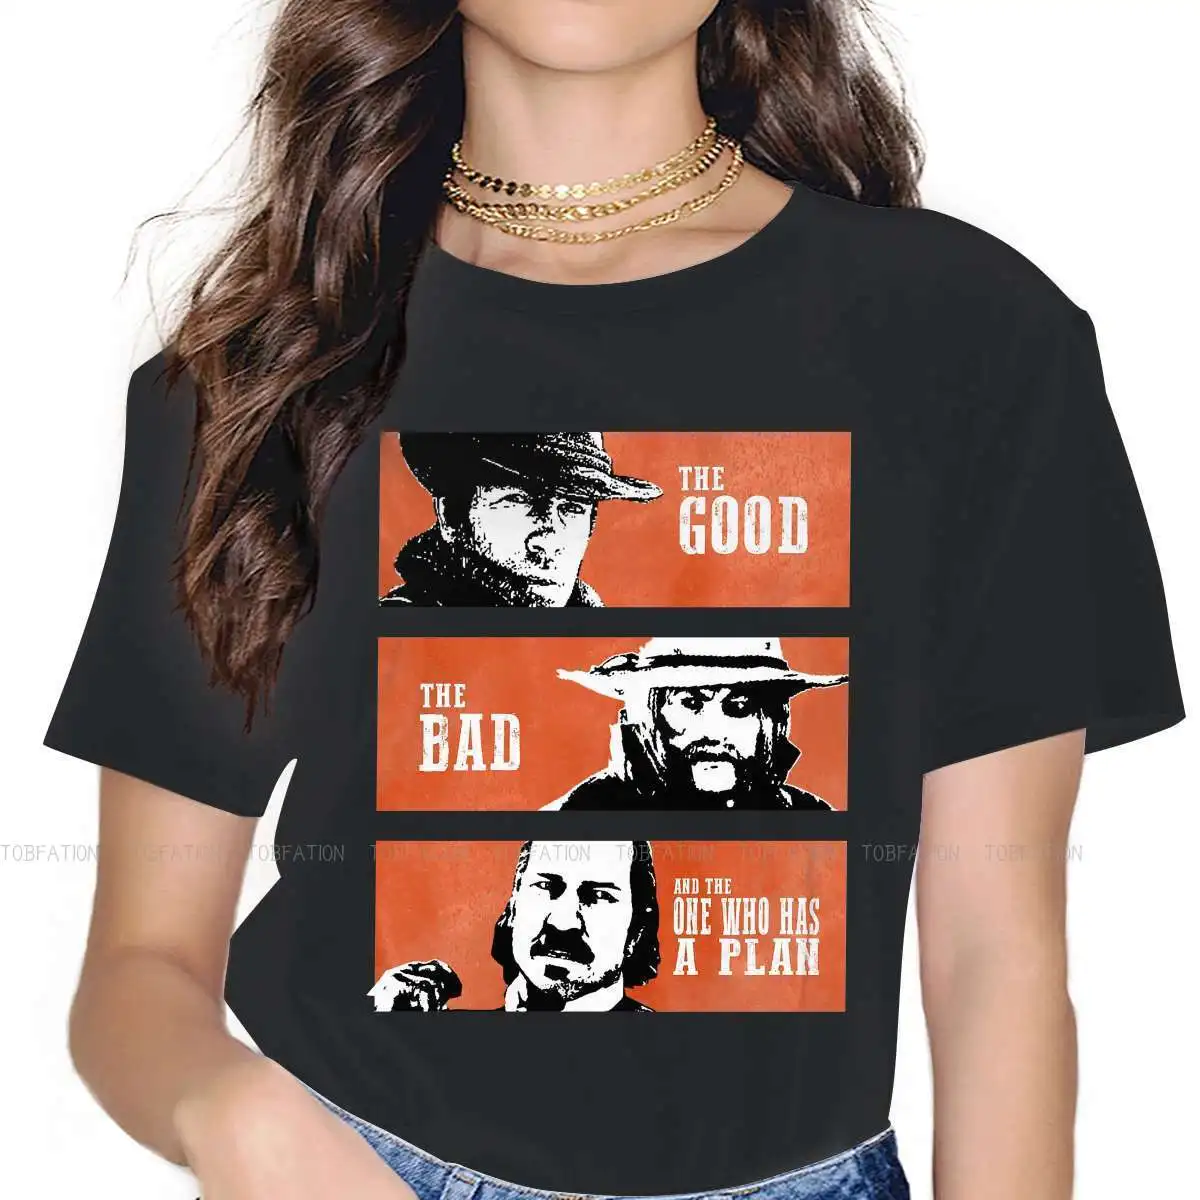 

Red Dead Redemption 100% Cotton TShirts The Good The Bad and The One Who Has A Plan Woman's T Shirt 5XL Clothing